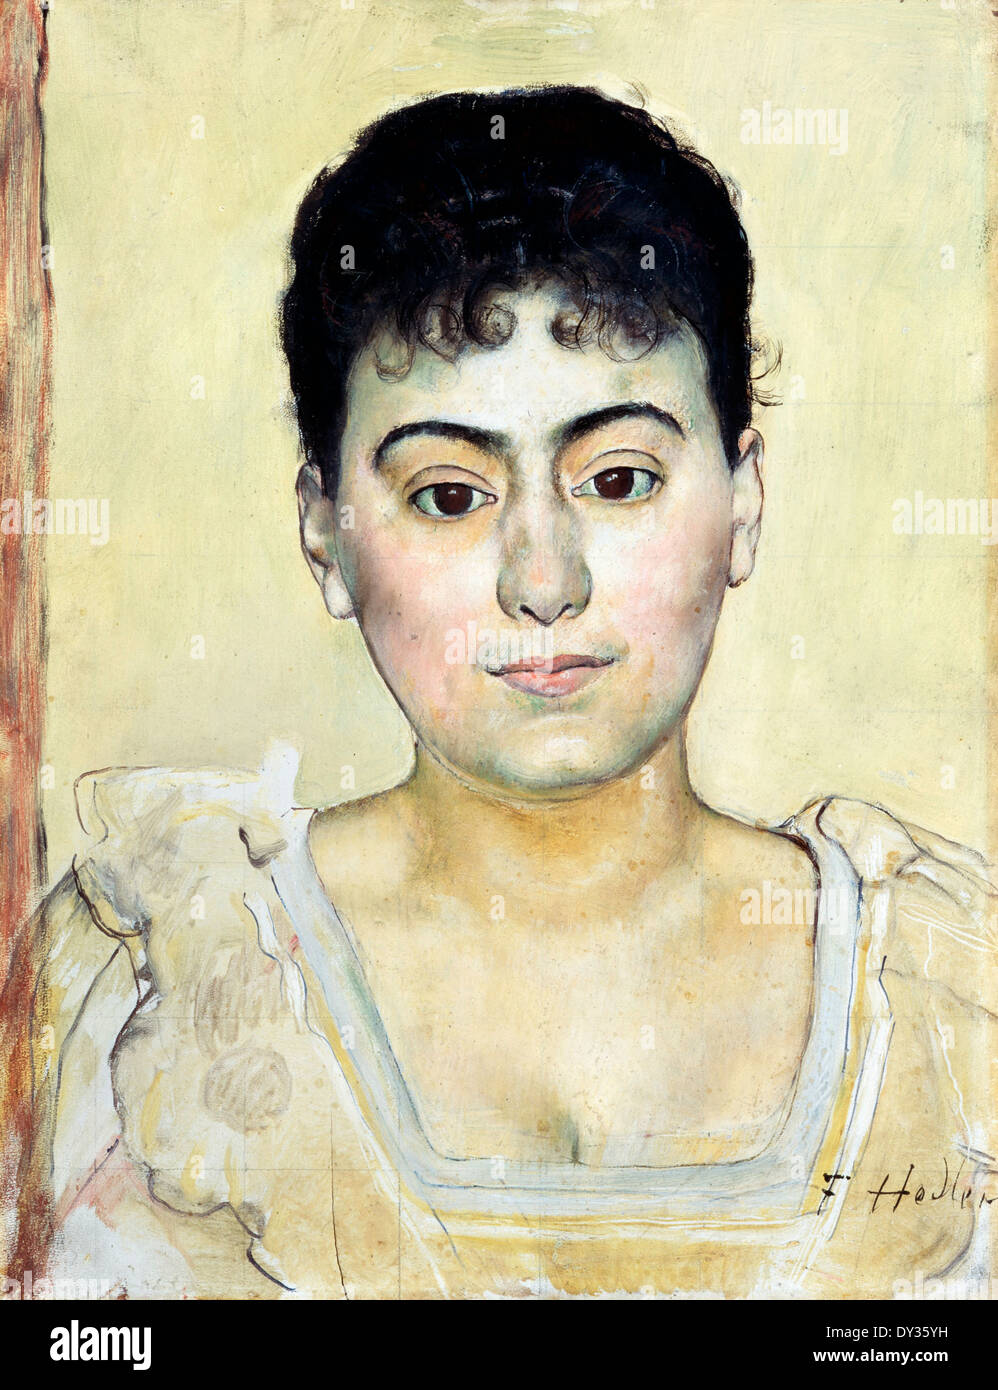 Ferdinand Hodler, Portrait of Madame de R. 1893 Oil on canvas. New Masters Gallery, Dresden, Germany. Stock Photo